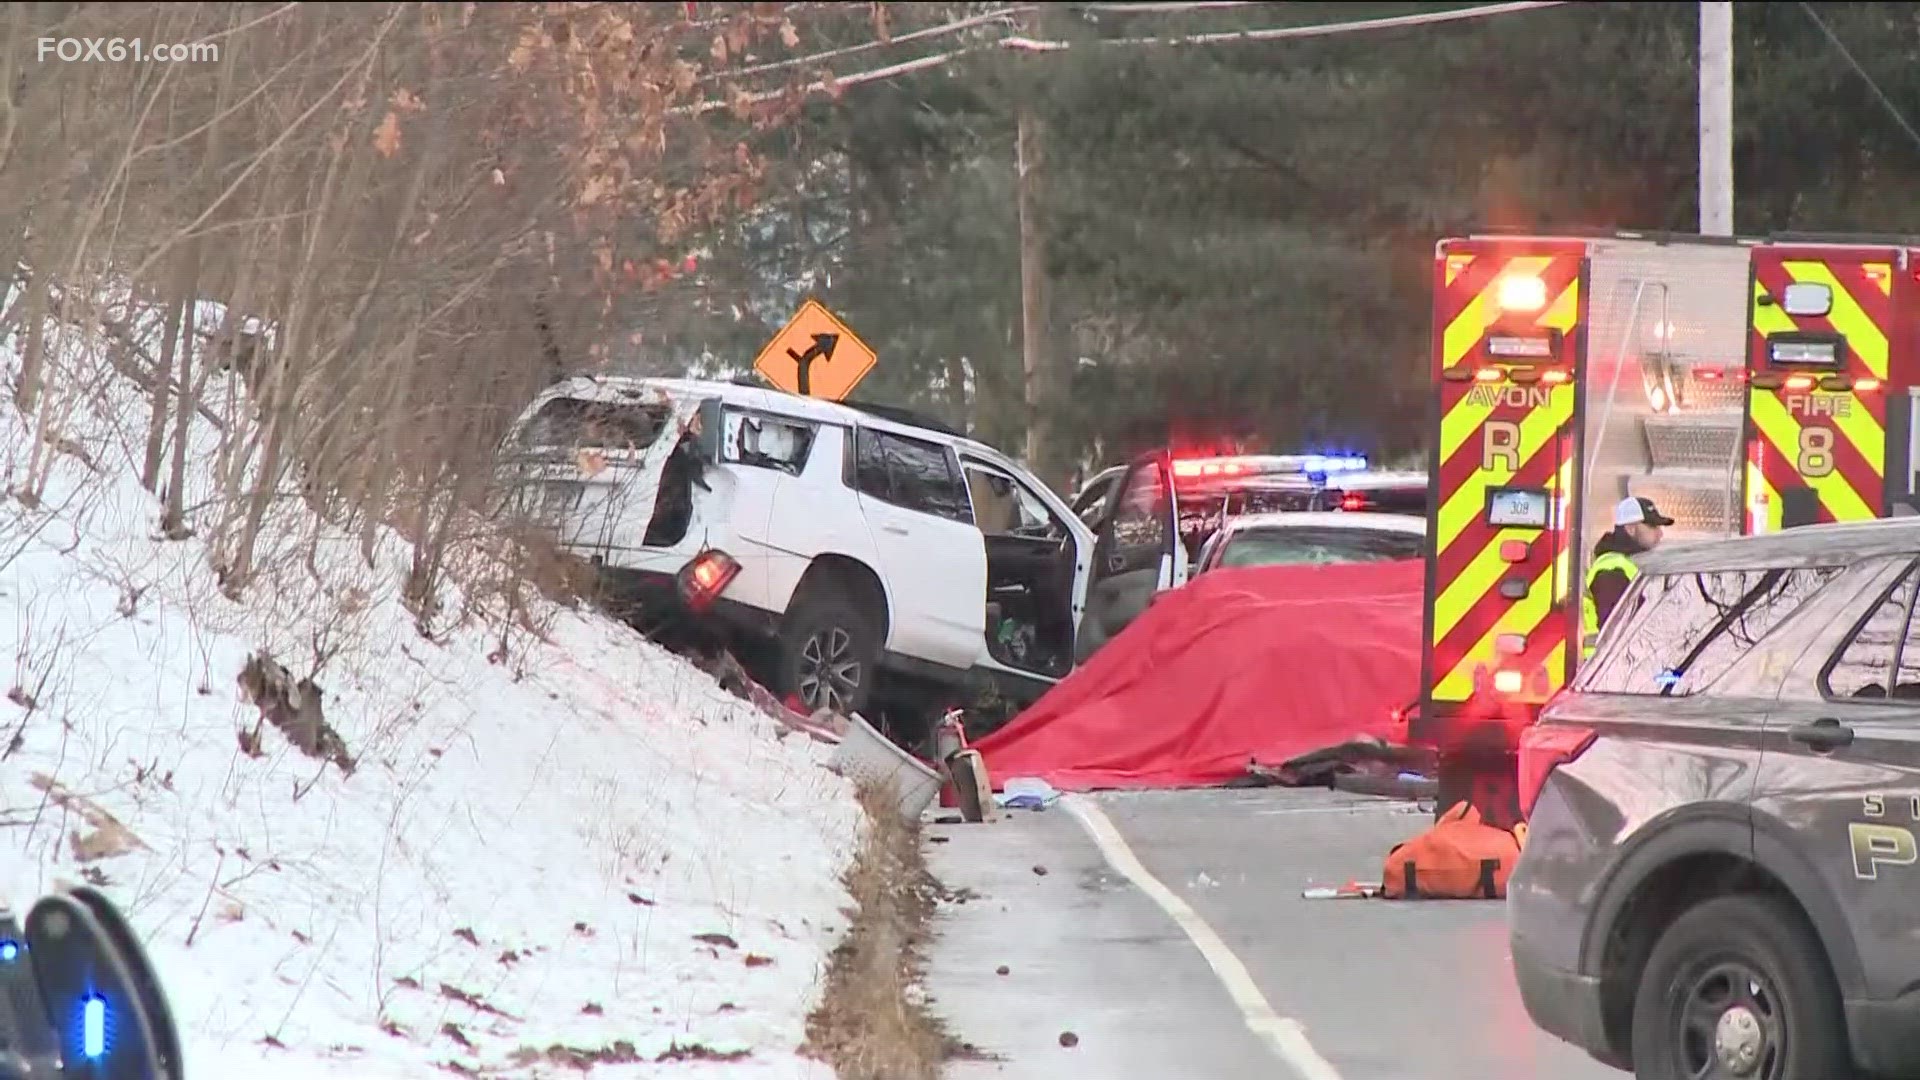 The crash happened between several vehicles on Route 10 on Tuesday morning.